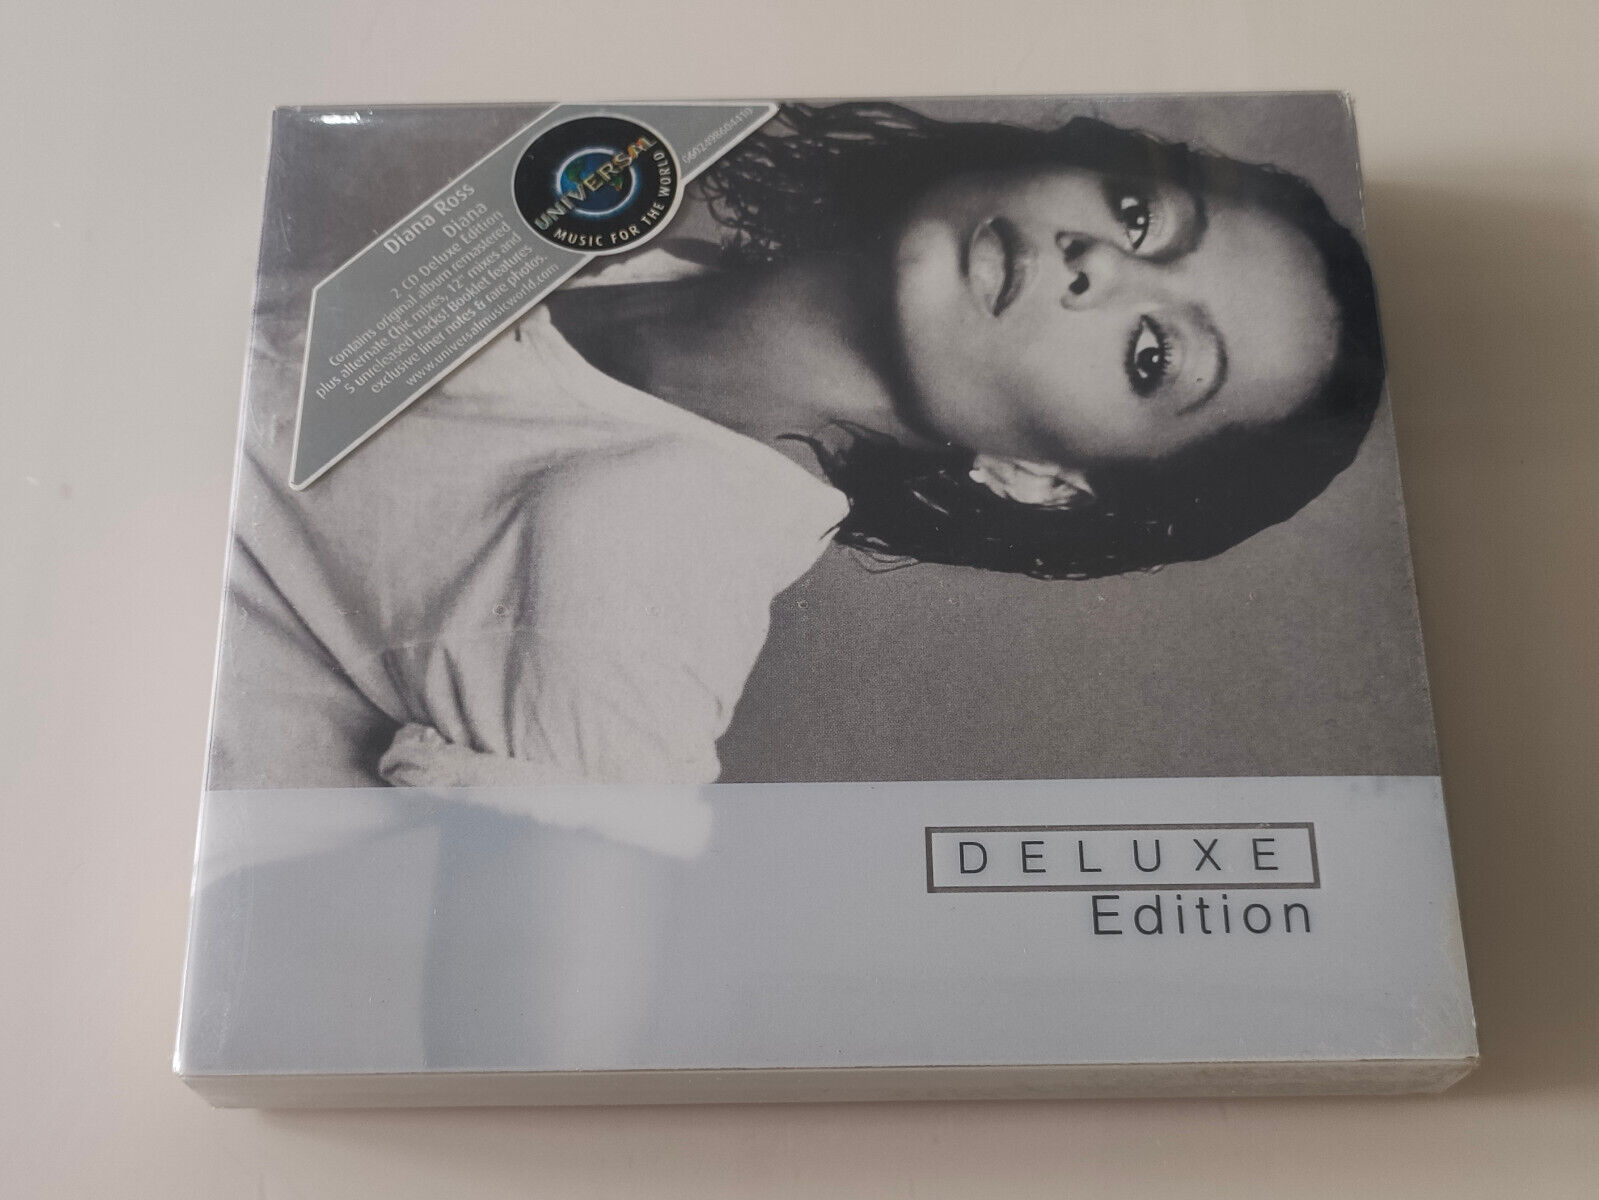 Diana: Deluxe Edition by Diana Ross (2CD, 2001)